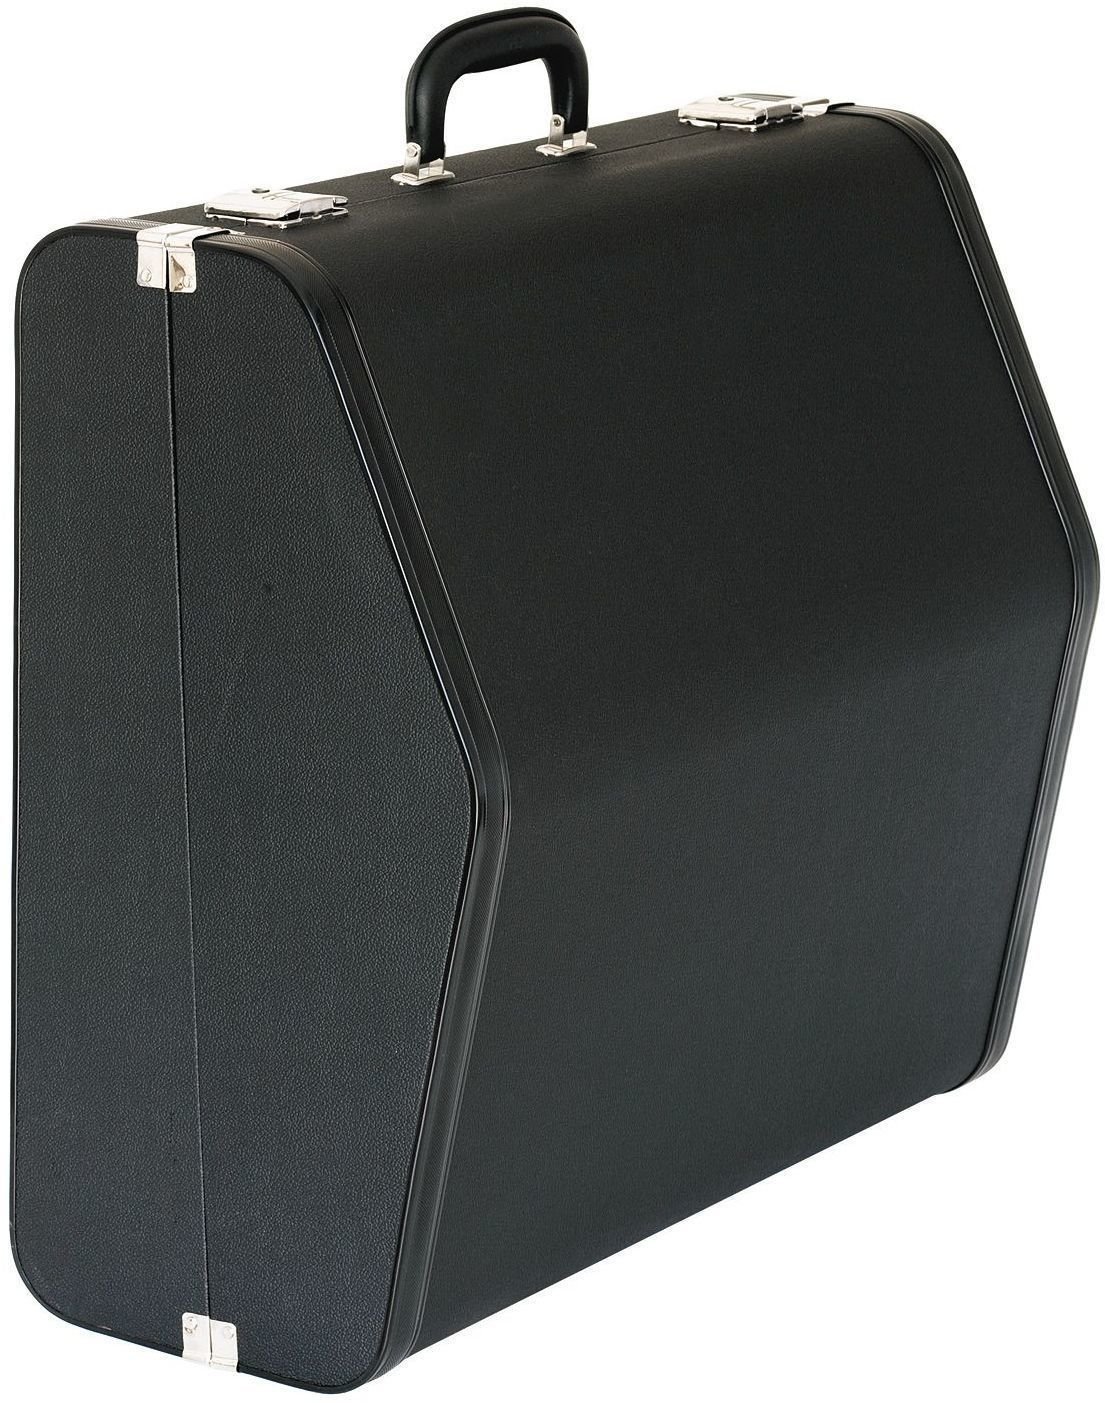 Case for Accordion Weltmeister 34/80 Big/Achat HC BK Case for Accordion